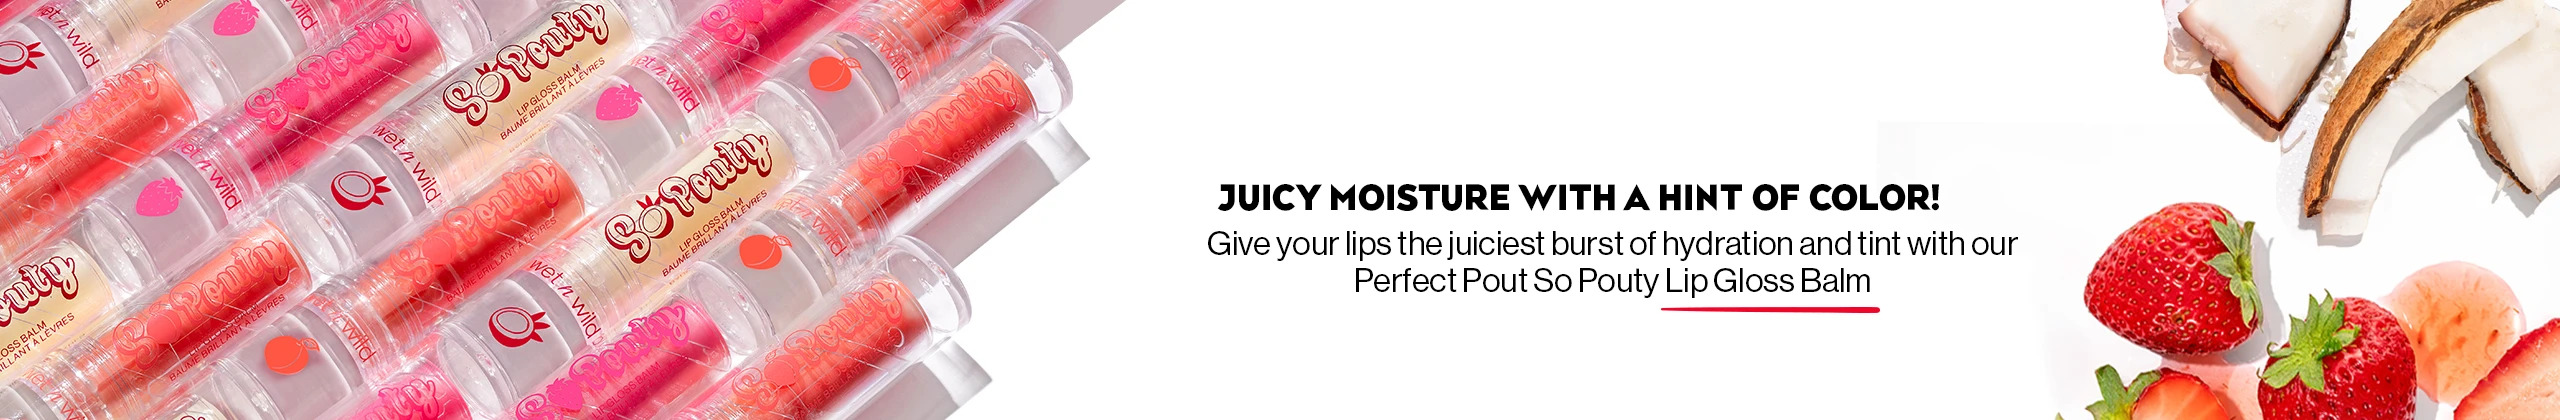 Juicy Moisture with a hint of color! Give your lips the juiciest burst of hydration and tint with our Perfect Pout So Pouty Lip Balm!